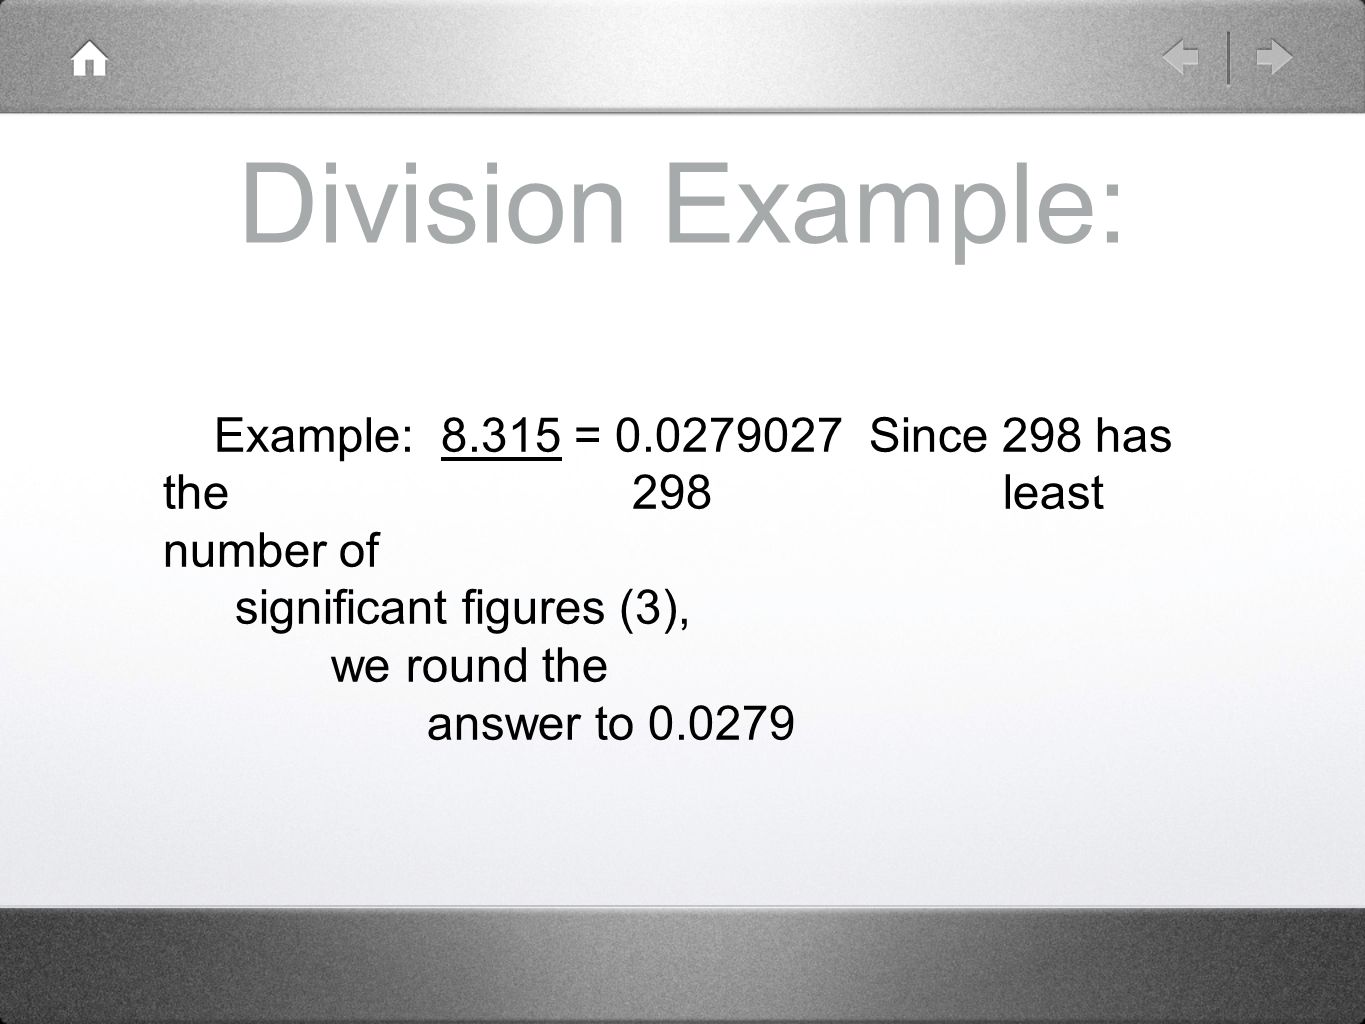 Division Example: